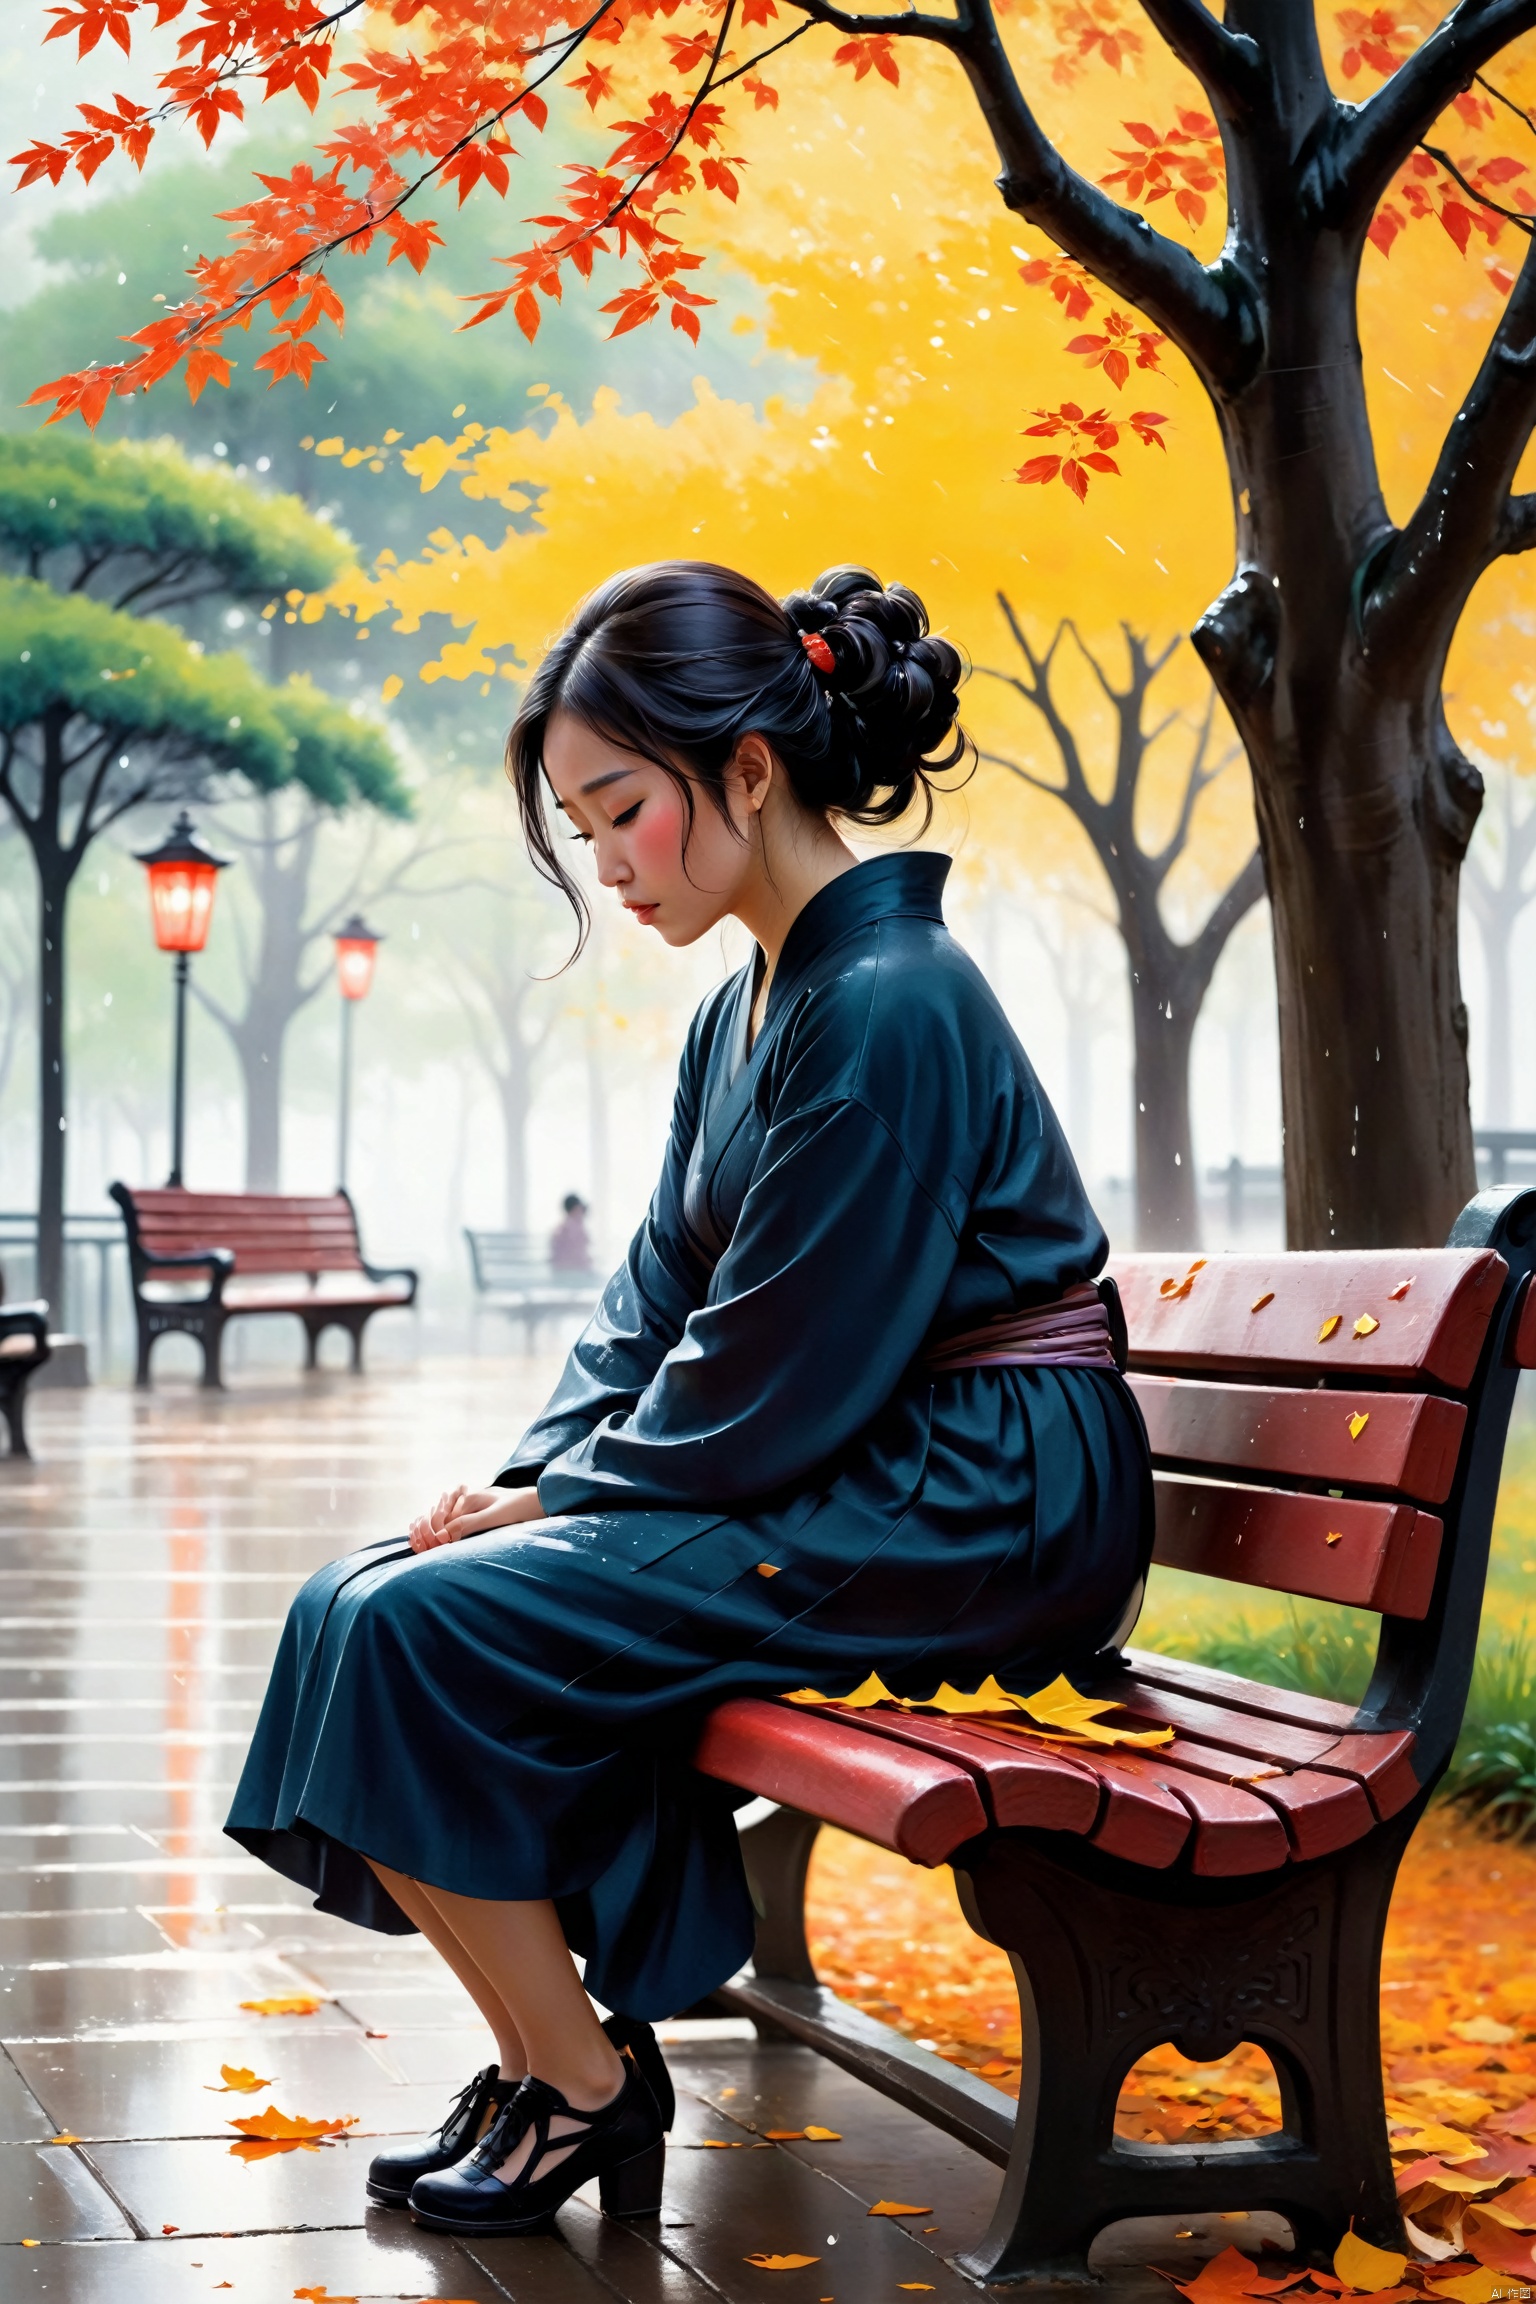 On a park bench, a young woman curls up, hugging her knees, with tears streaking her cheeks. The surrounding trees sway in the wind, and the fallen leaves appear particularly vibrant after the rain. Her silhouette on the bench is exceptionally lonely, as if the world is keeping its distance from her., traditional chinese ink painting